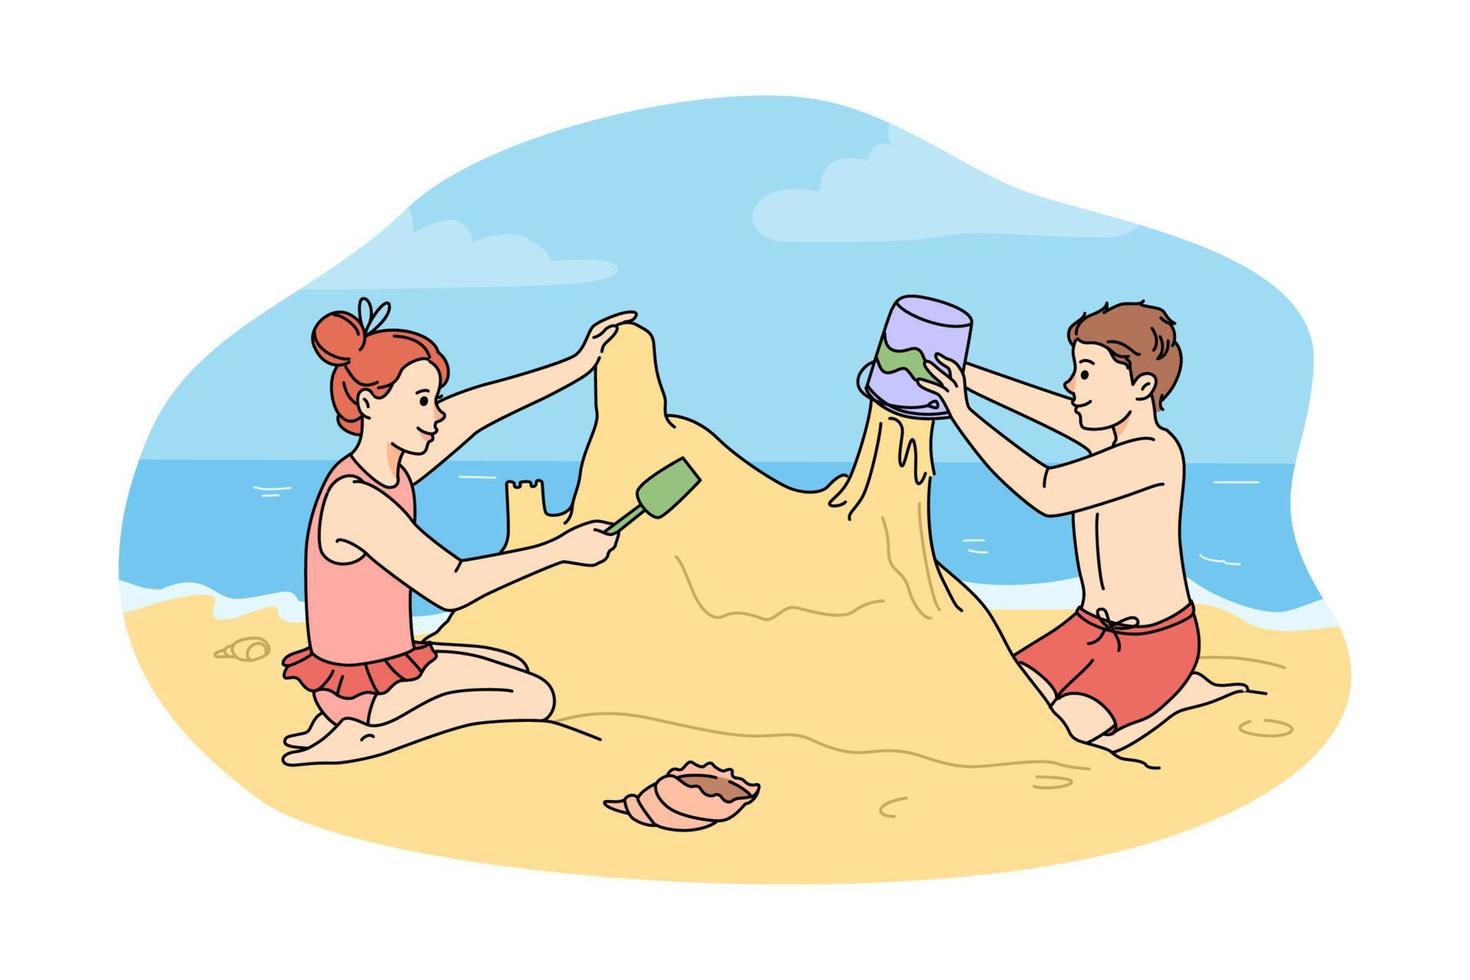 Happy children building sand castle on beach on summer holidays. Smiling little kids play with sandcastle enjoy summertime vacation on seacoast. Seaside fun concept. Vector illustration.